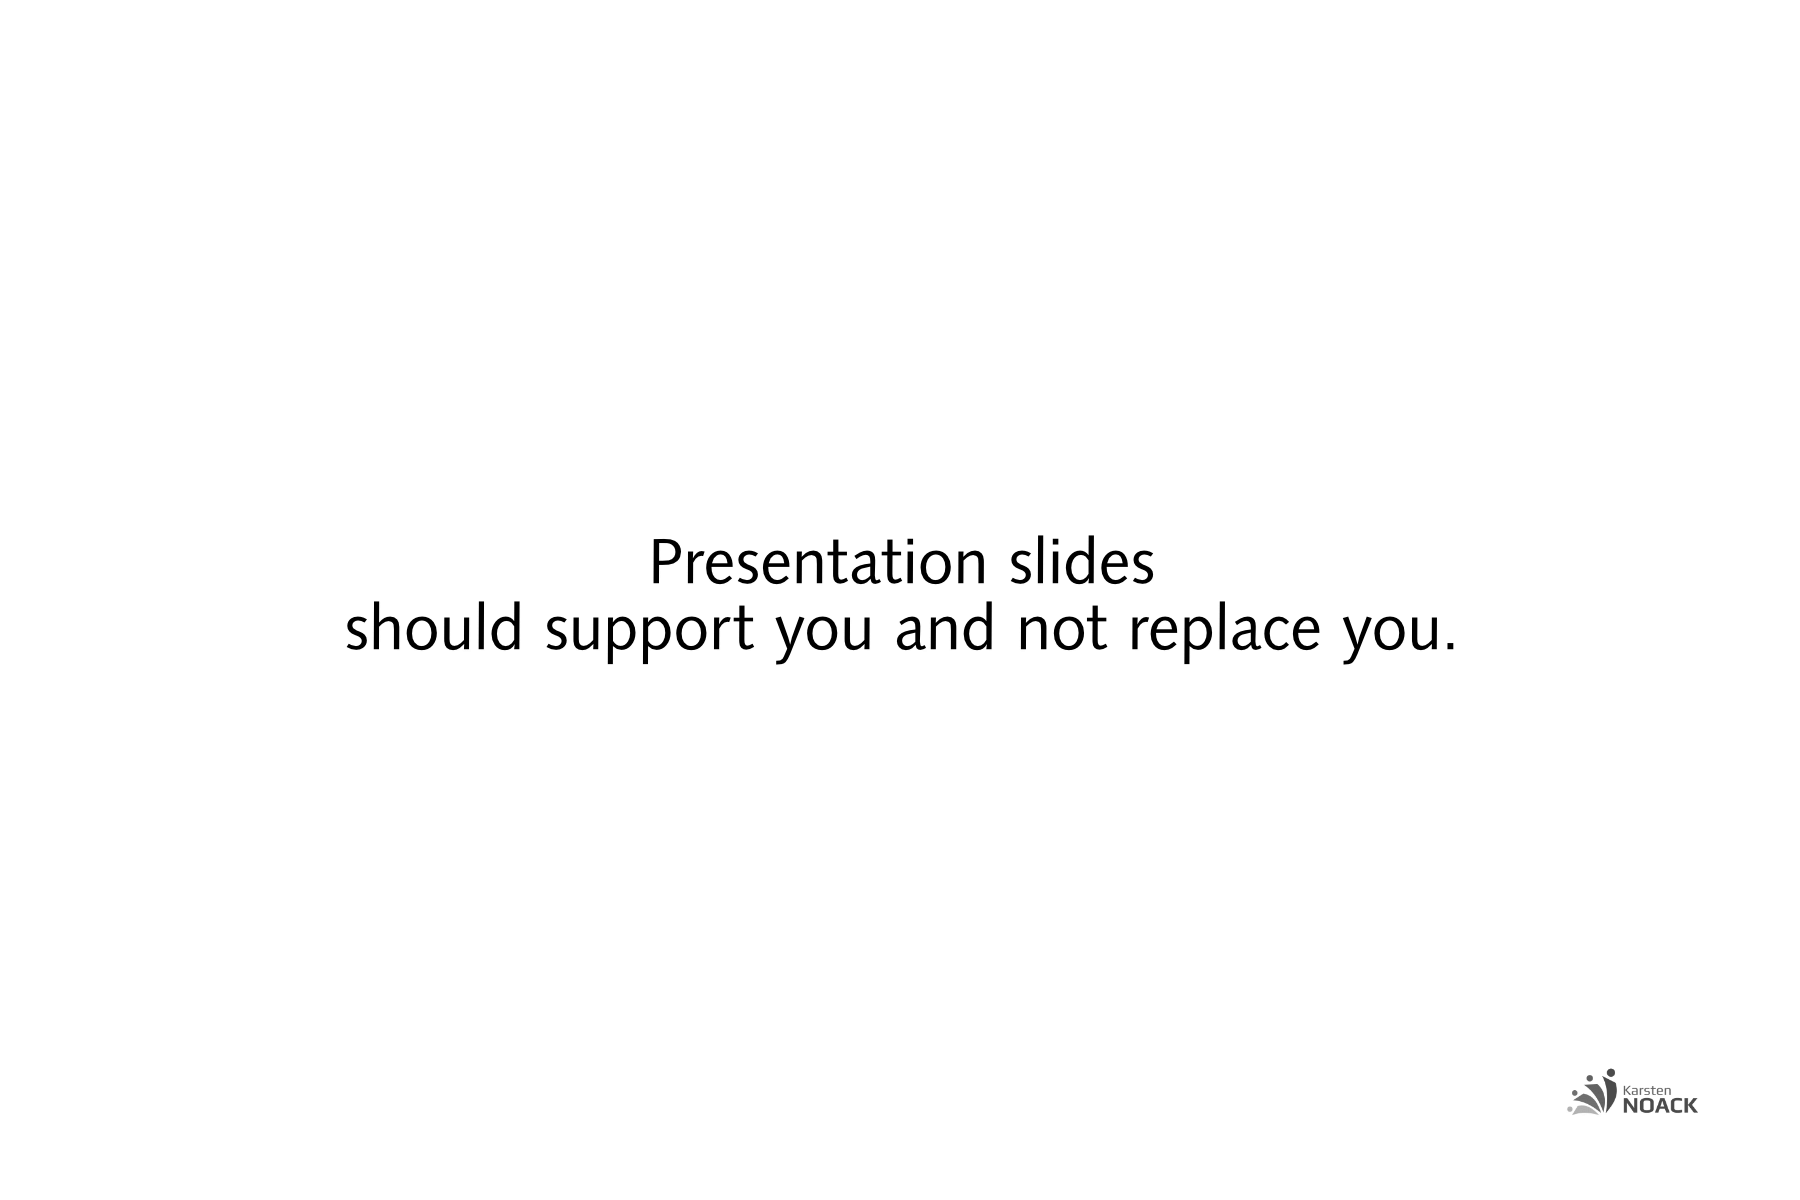 Presentation slides should support you and not replace you. - Karsten Noack